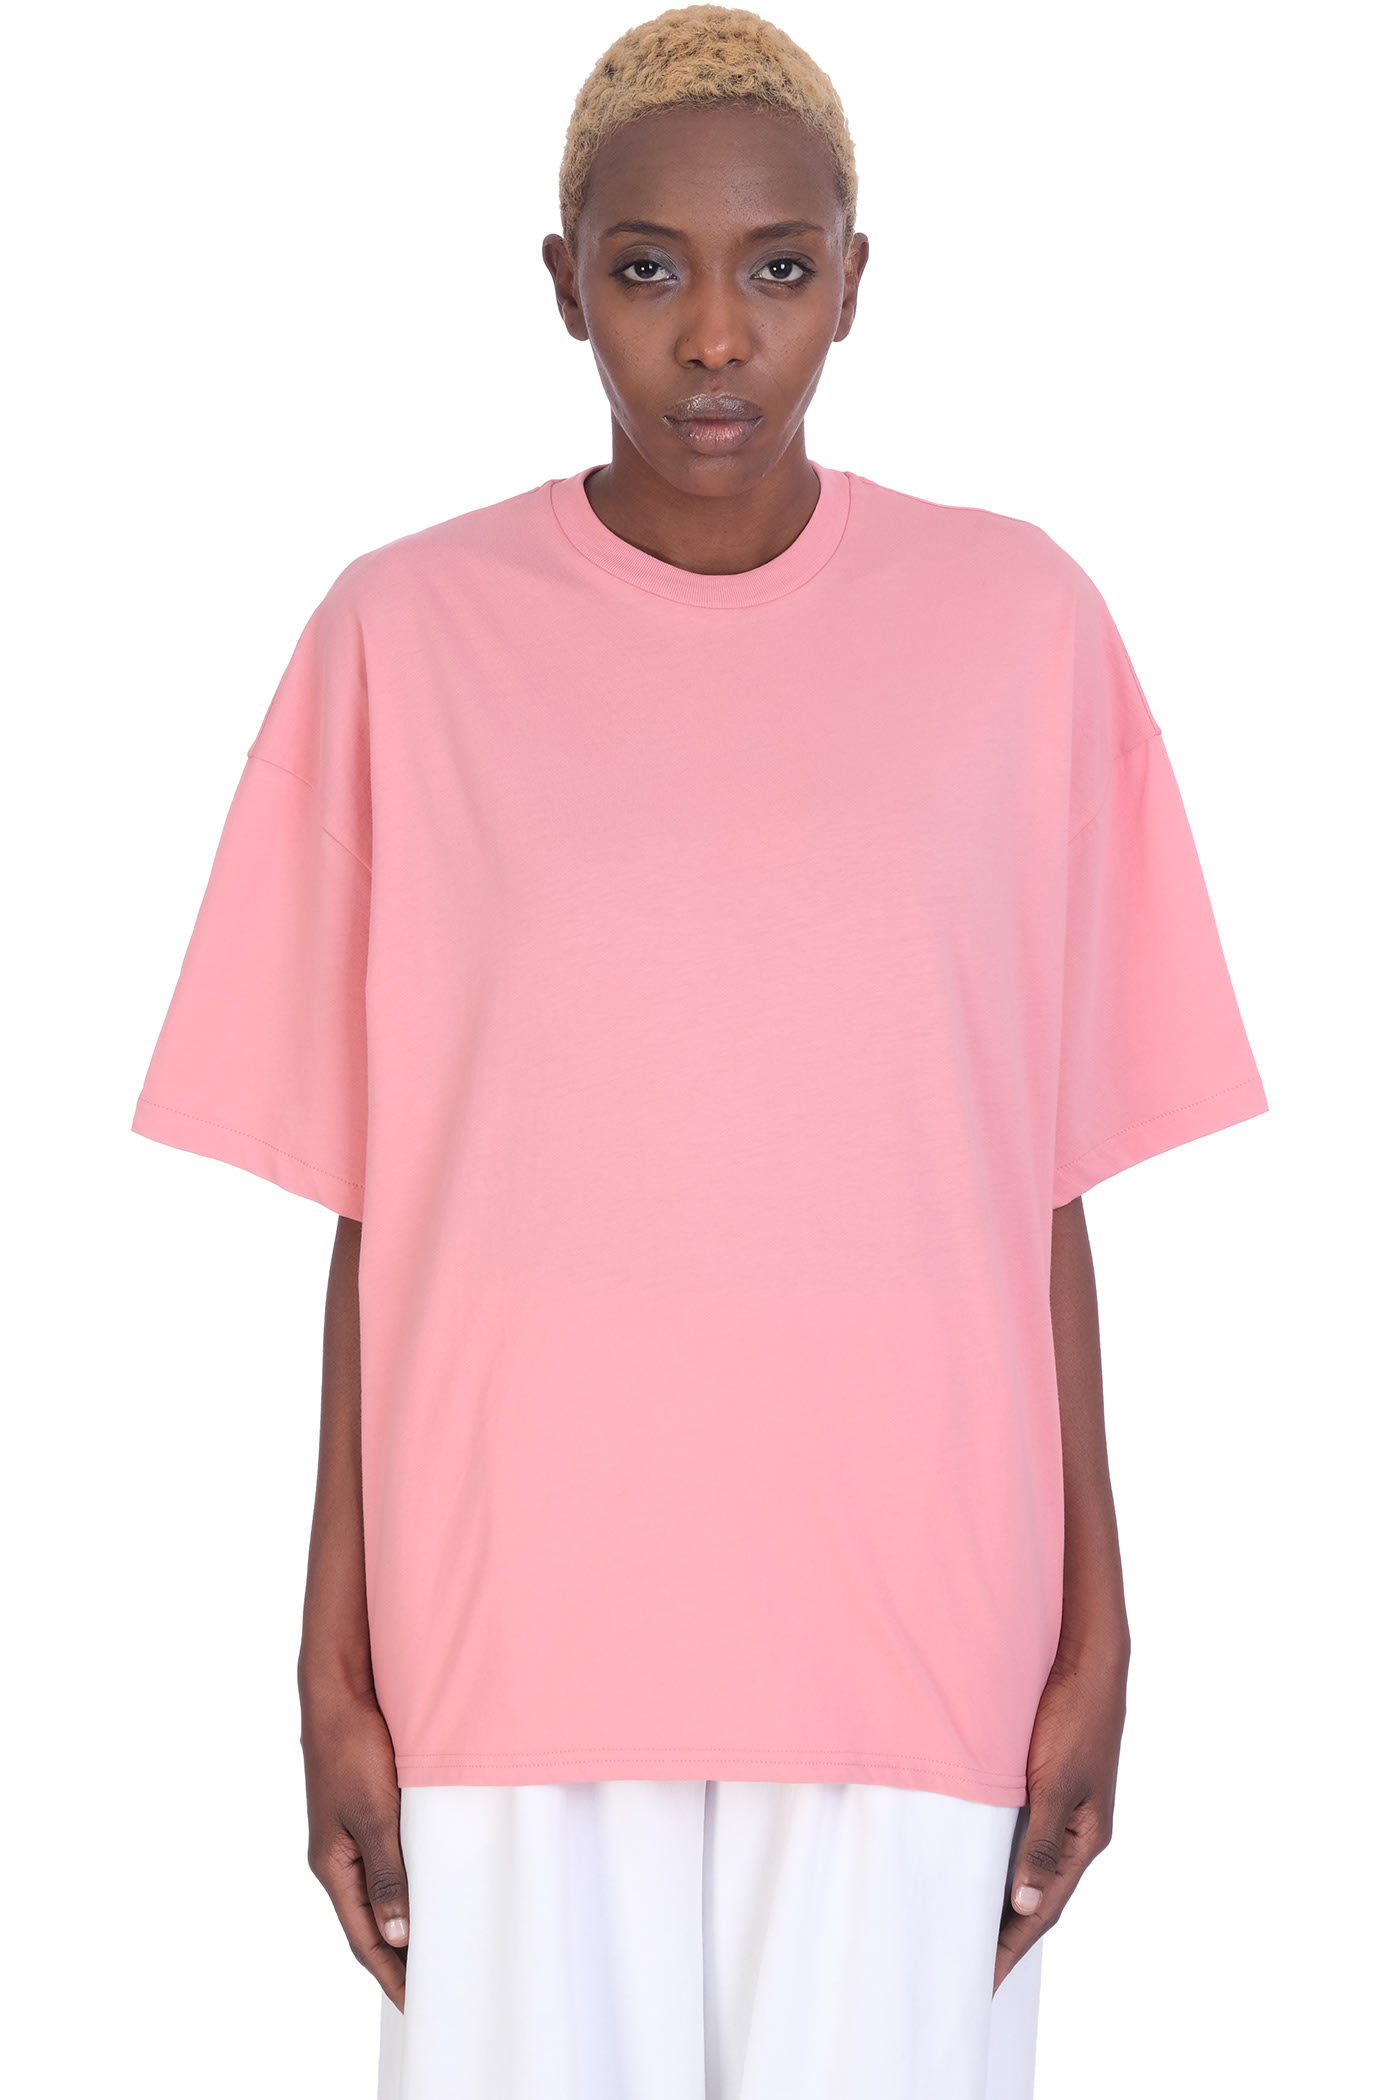 Alexandre Vauthier T-shirt In Rose-pink Cotton